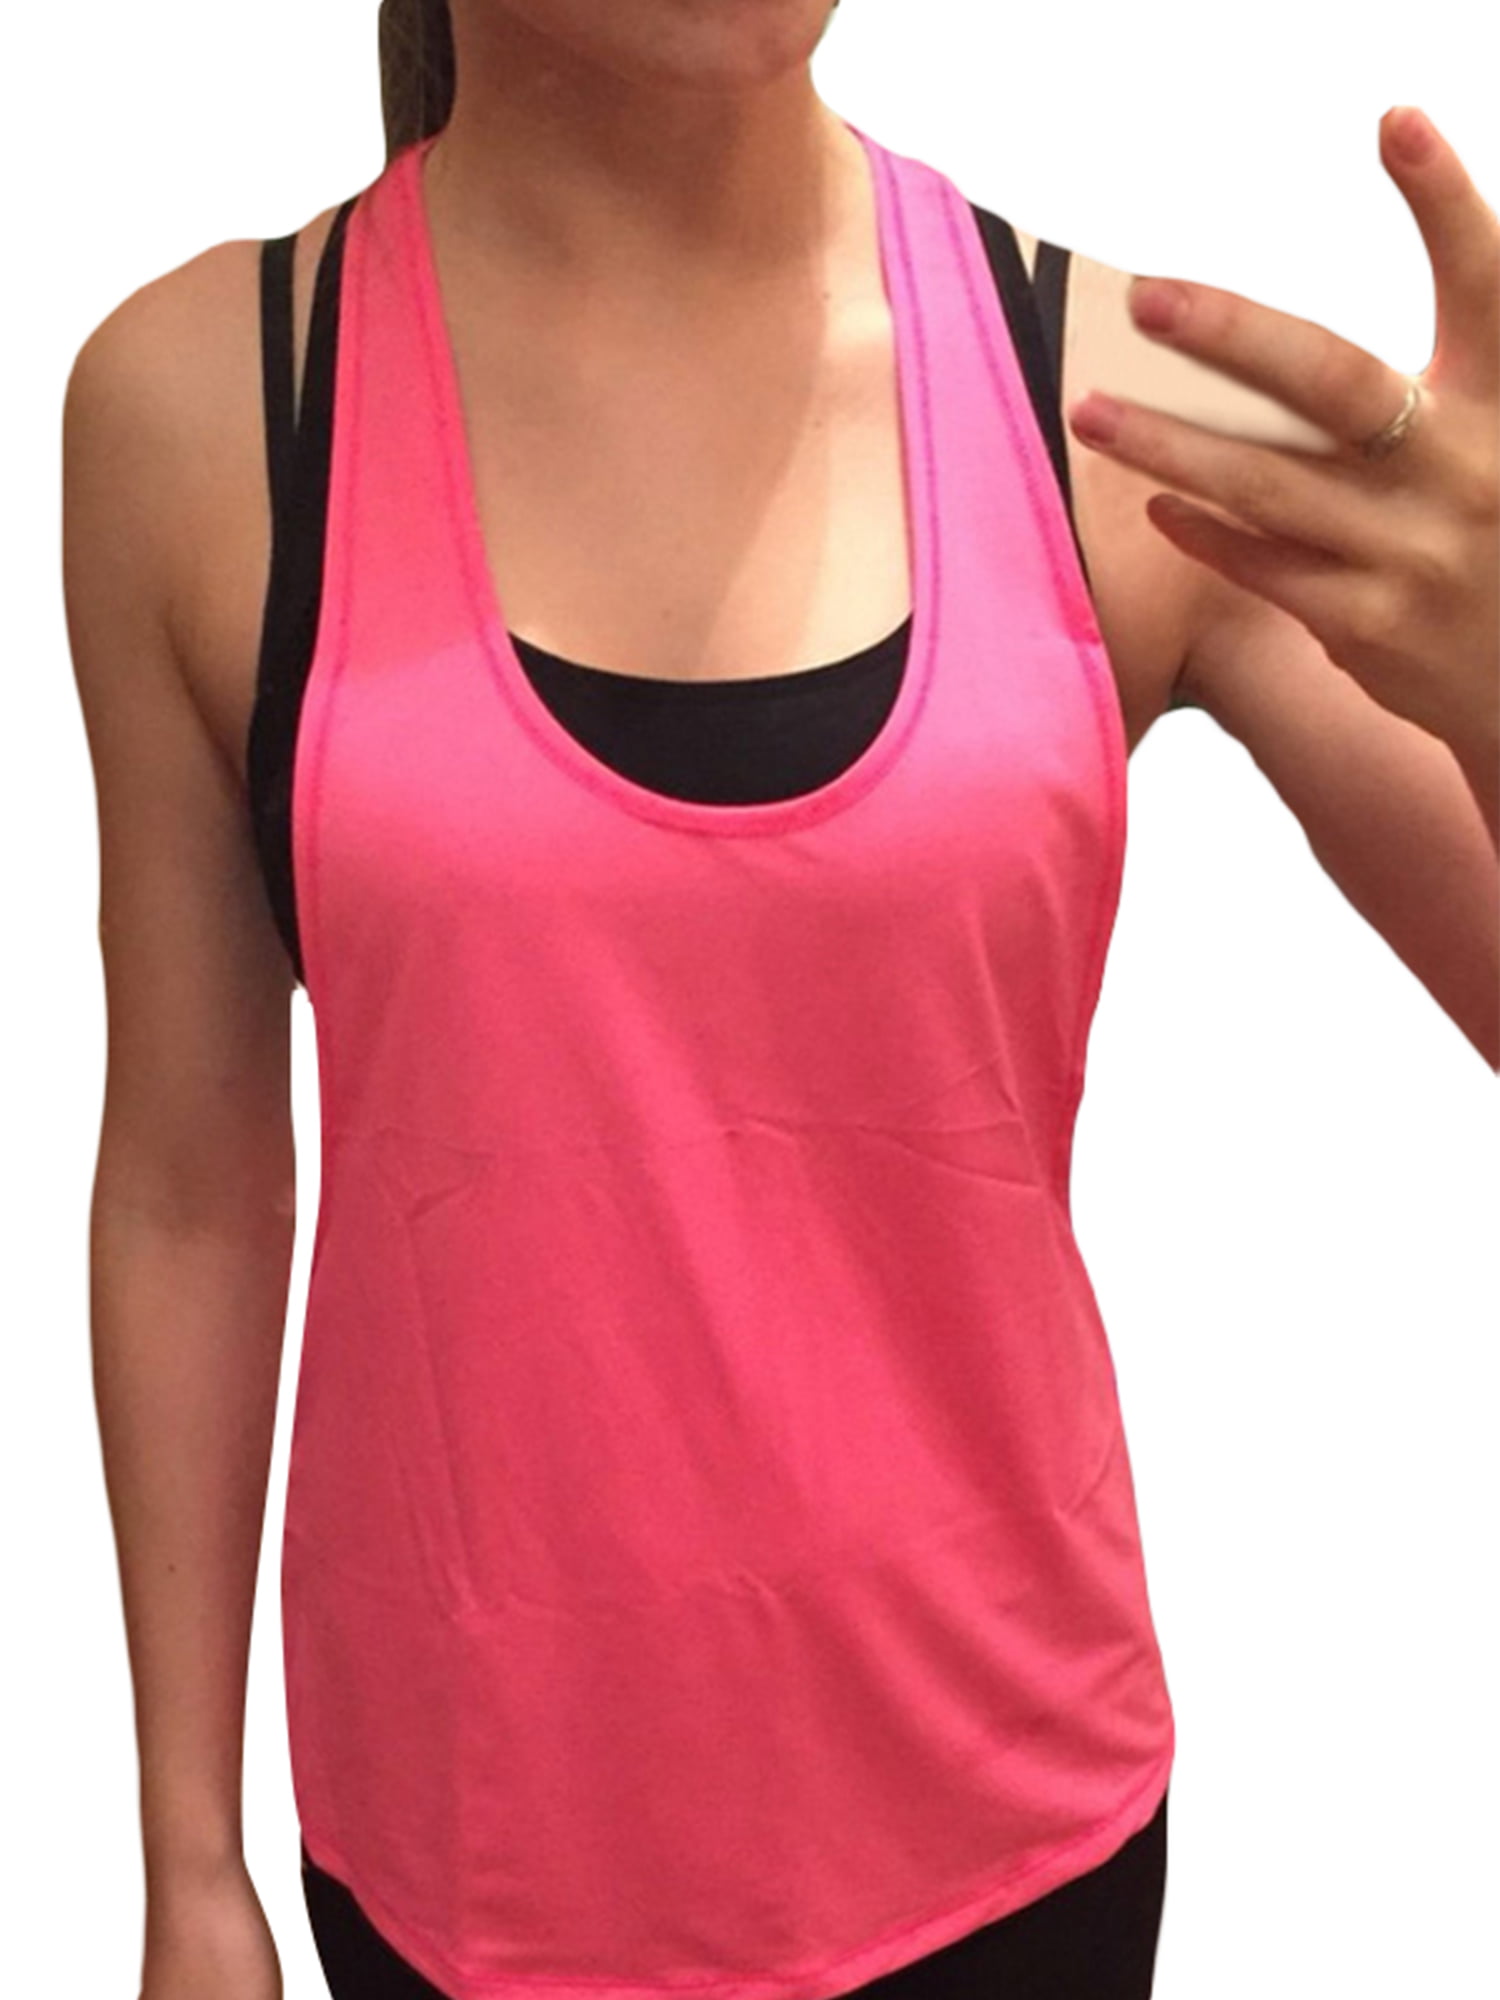 Workout Tops for Women Built in Bra Loose Tank Exercise Top Racerback Athletic Tank Yoga Shirt